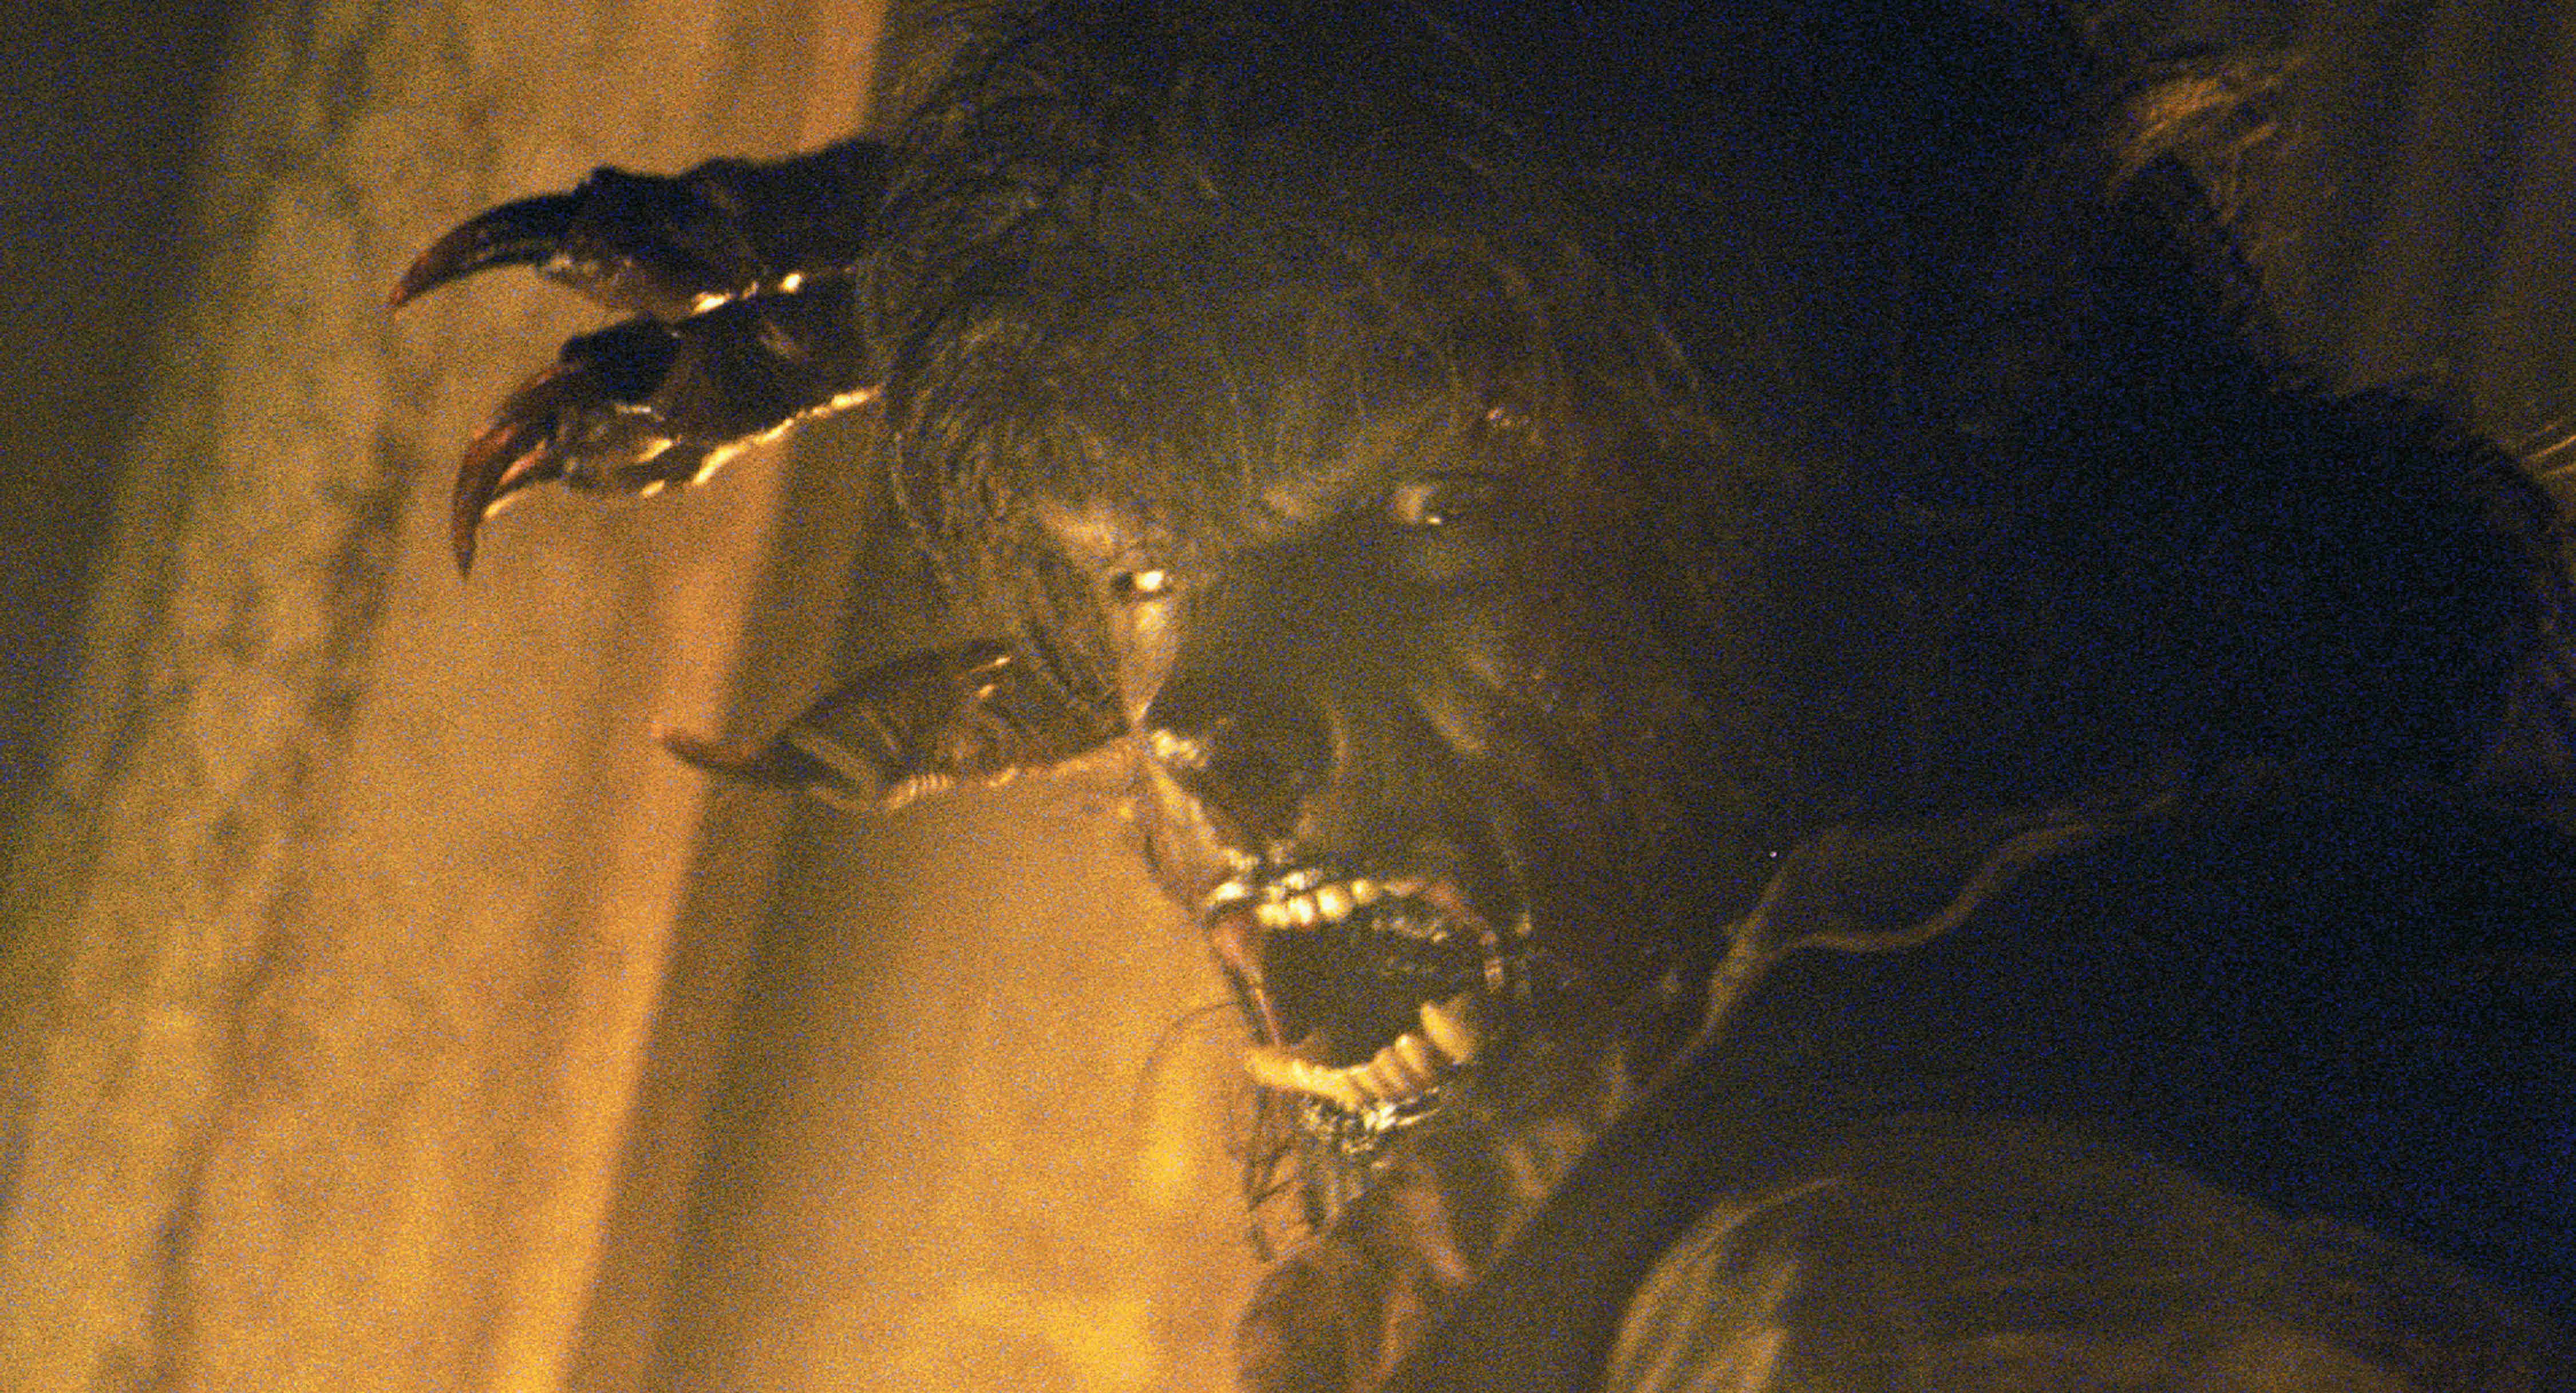 A scene from Universal Pictures' The Wolfman (2009)